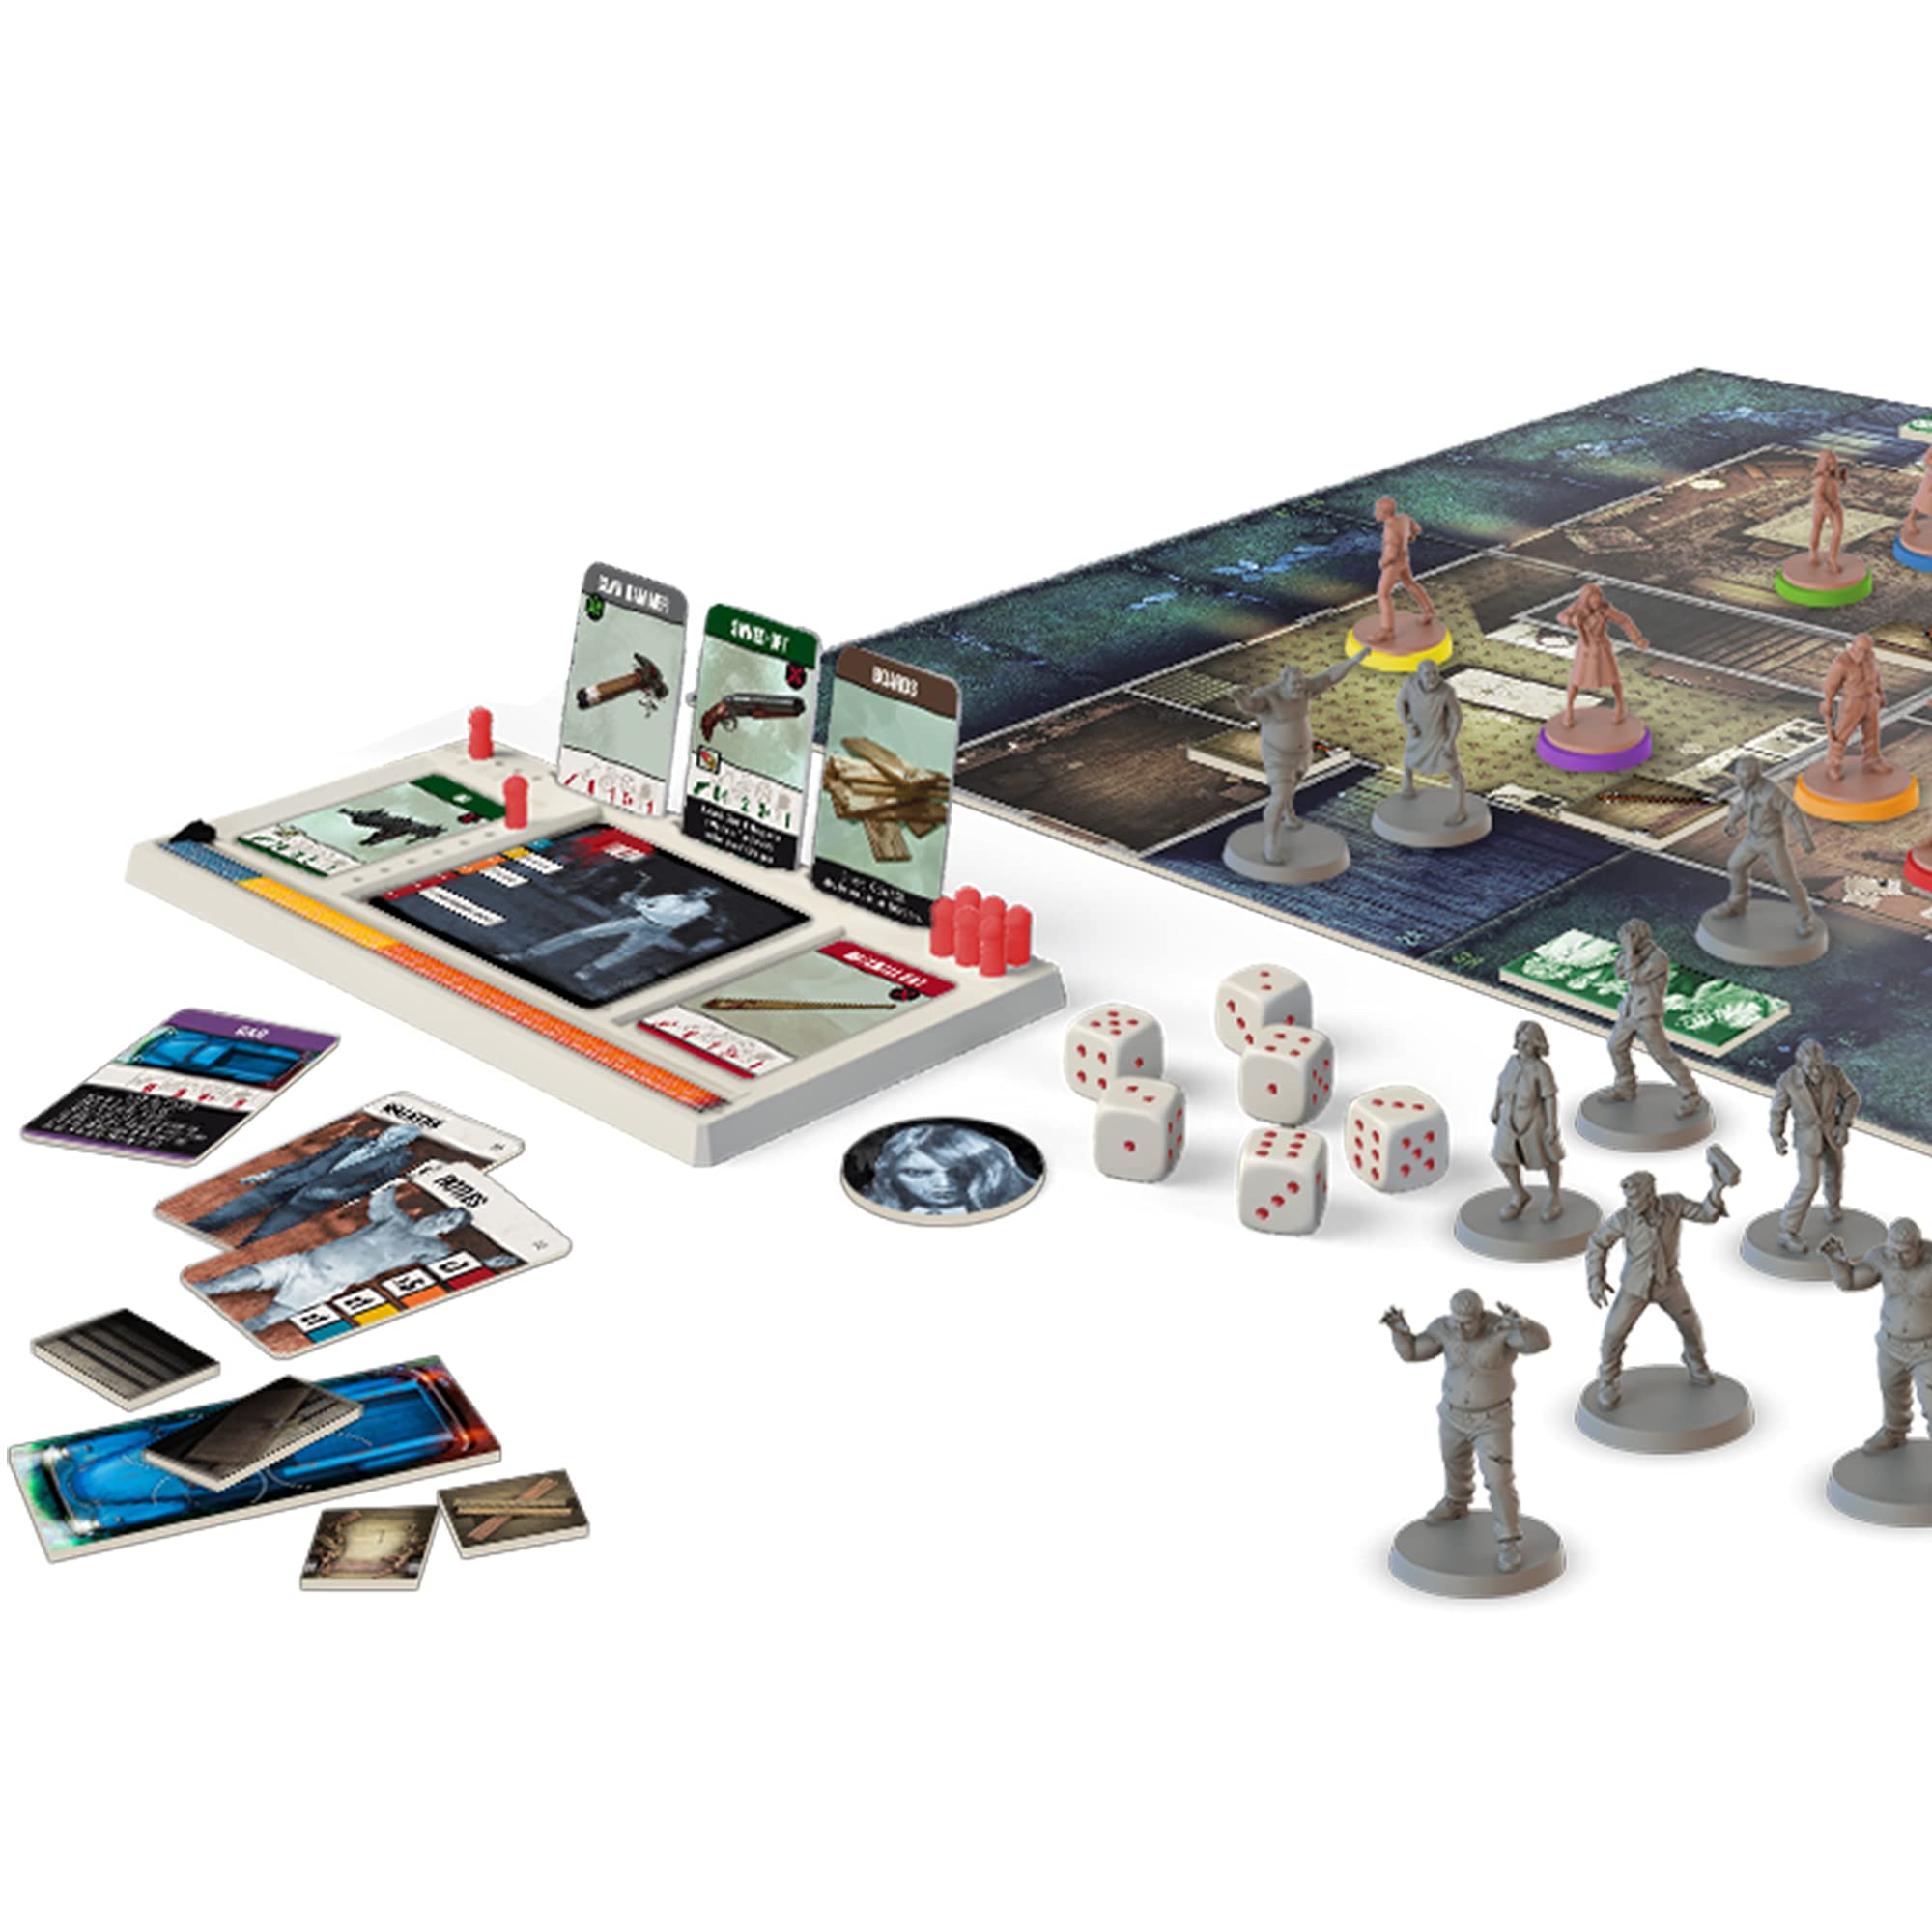 Zombicide Night of The Living Dead Board Game | Strategy Board Game | Cooperative Game for Teens and Adults | Zombie Board Game | Ages 14+ | 1-6 Players | Avg. Playtime 1 Hour | Made by CMON